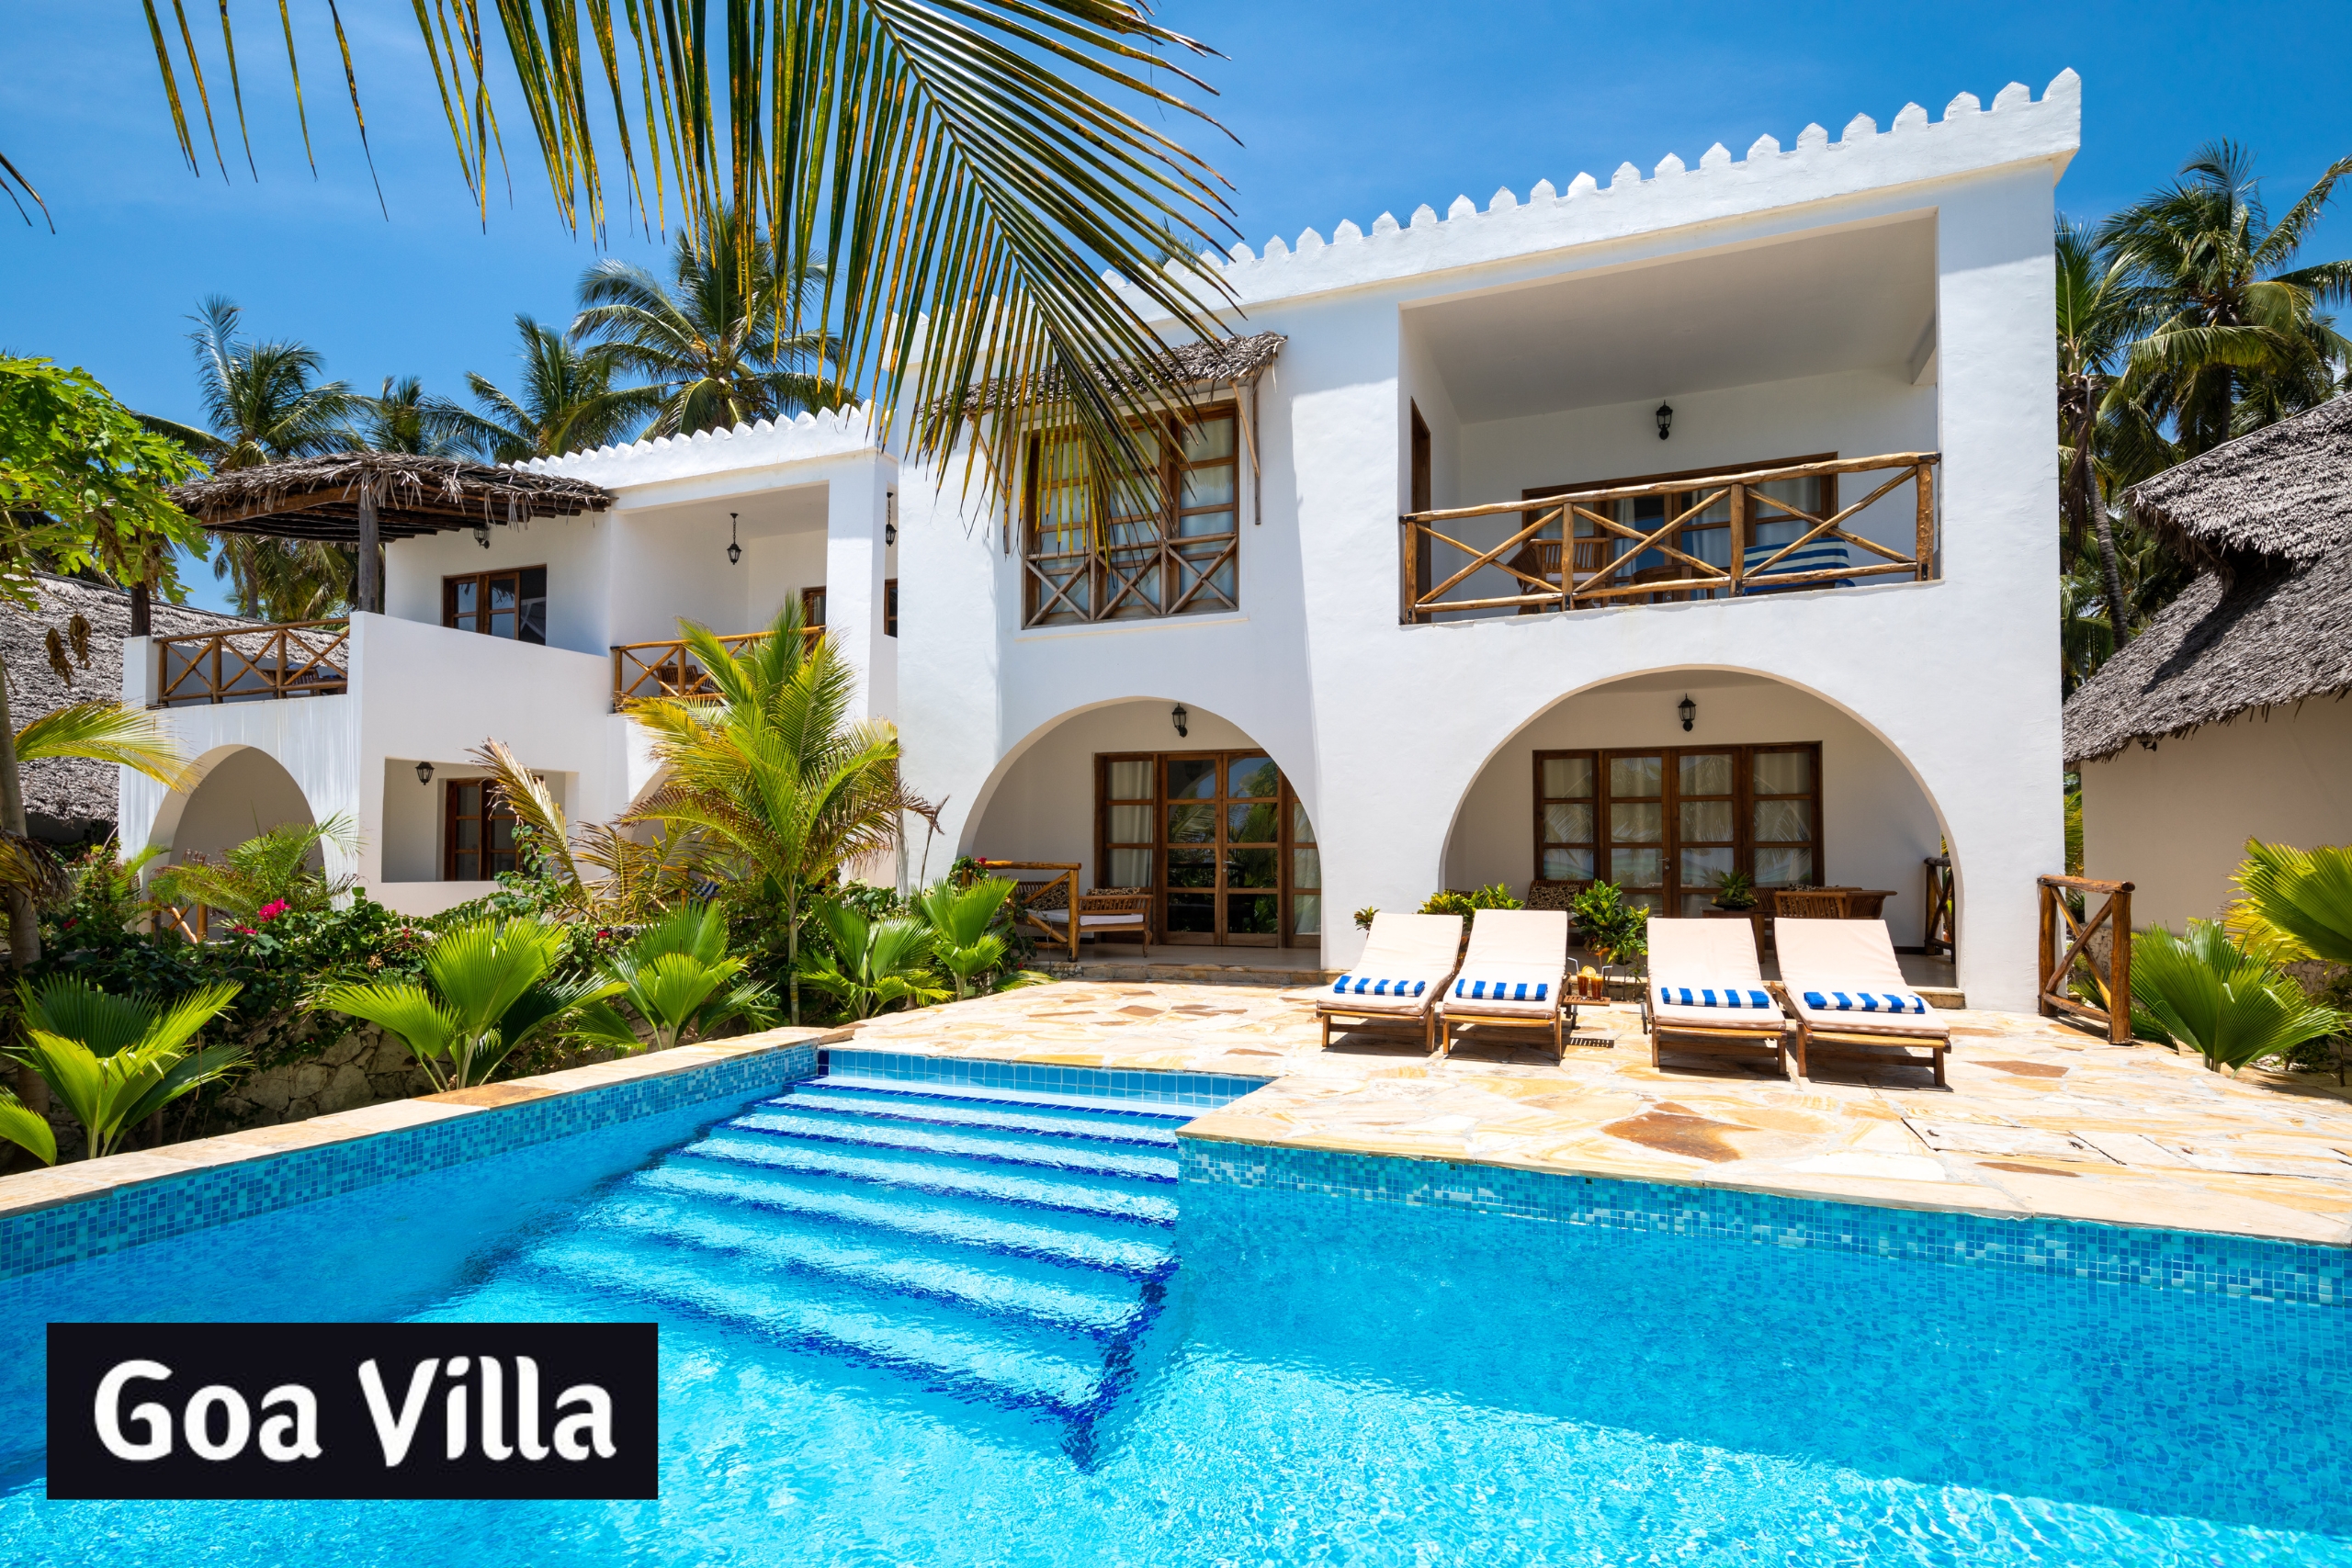 How To Book Your Dream Vacation Home With GoaVilla